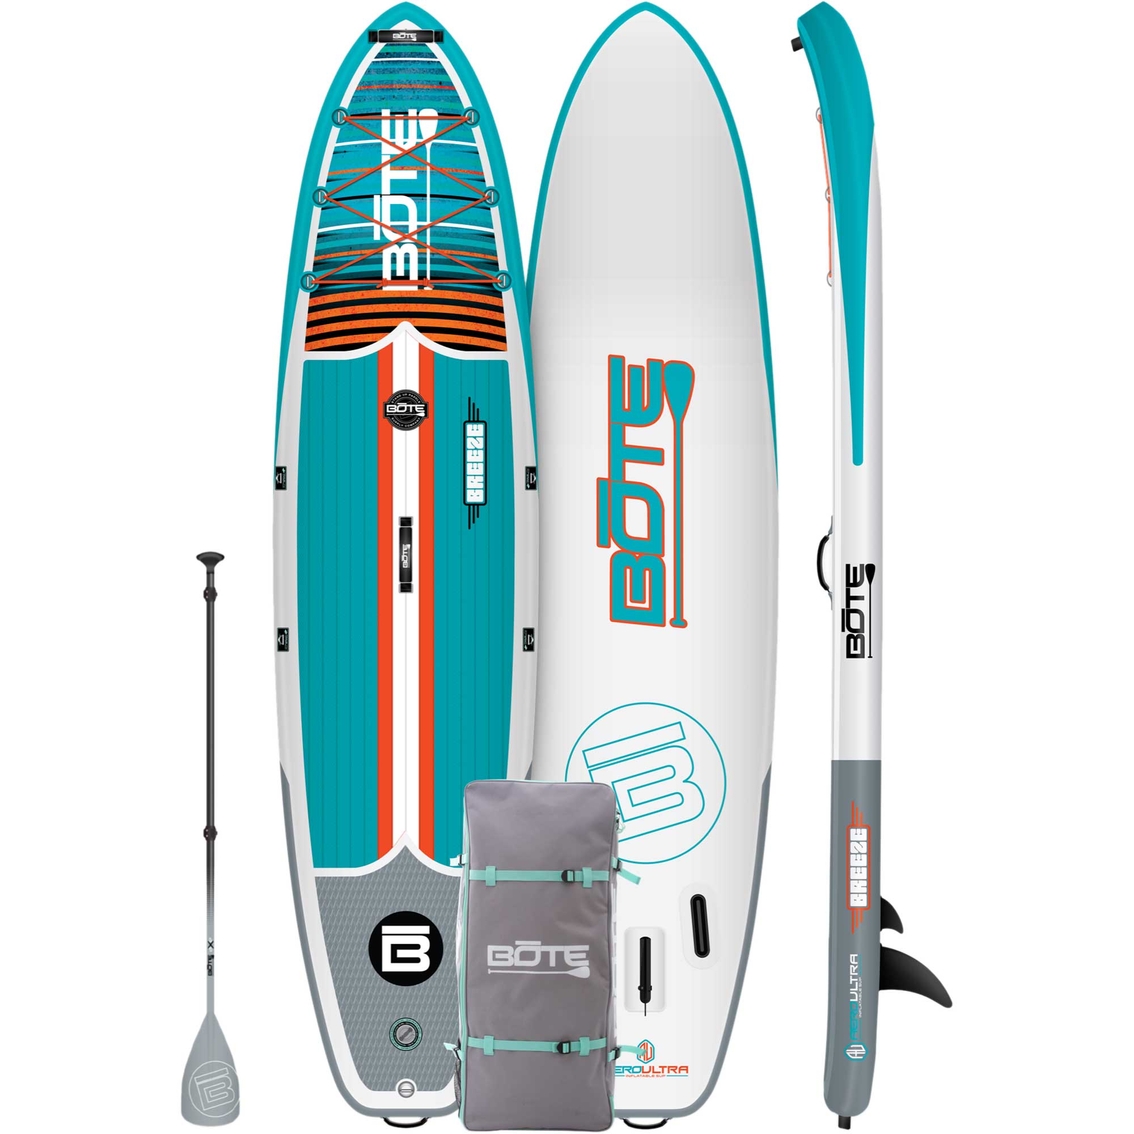 Bote Breeze 11 ft. 6 in.  Inflatable Stand Up Paddle Board Package